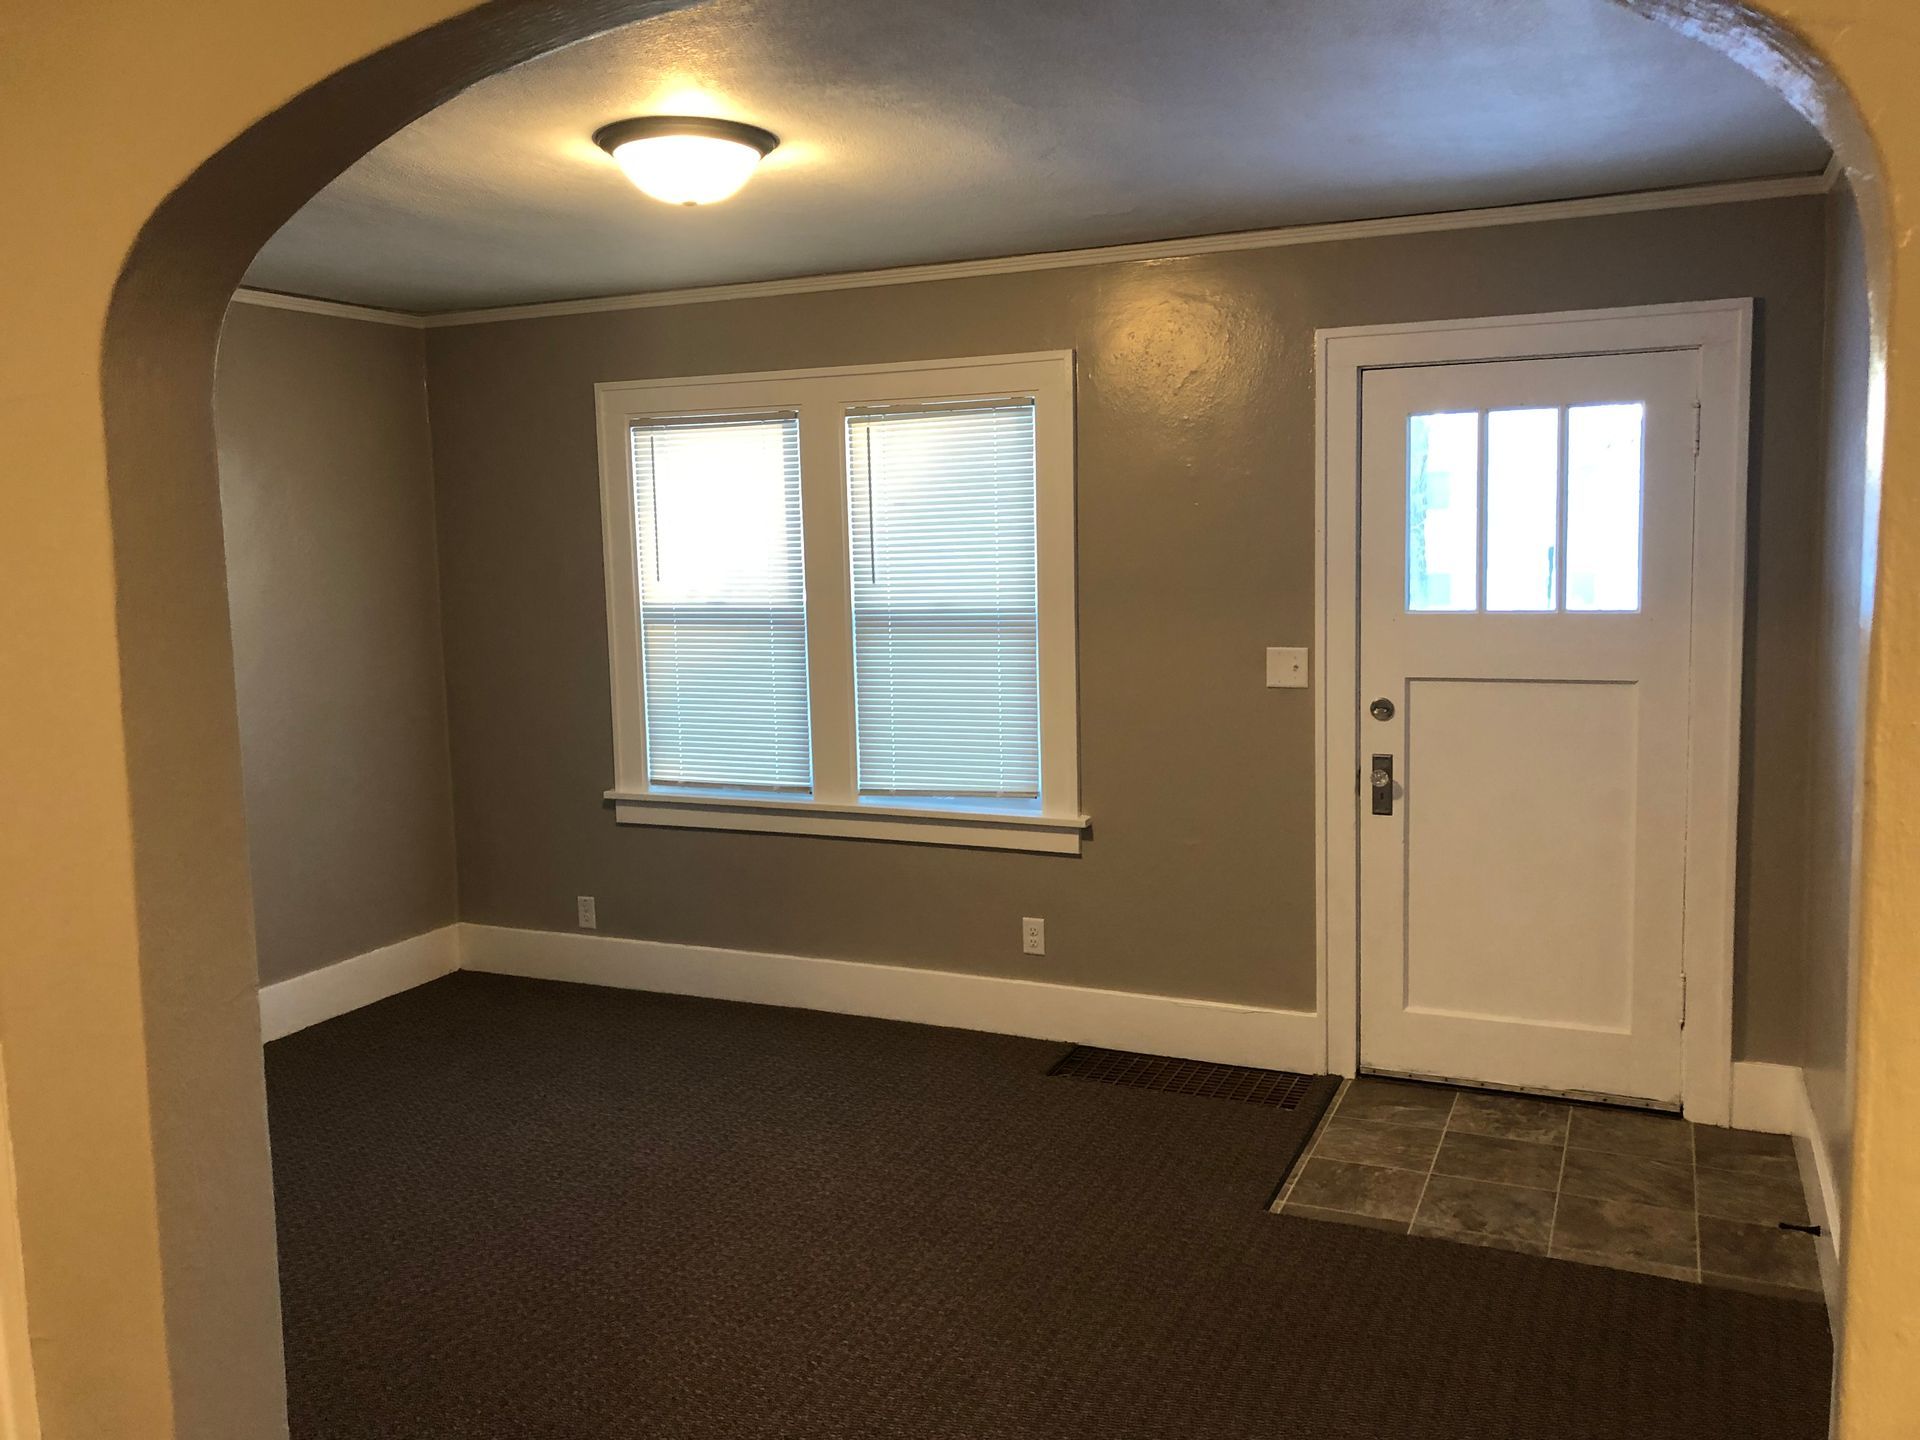 An empty living room with a white door and two windows.